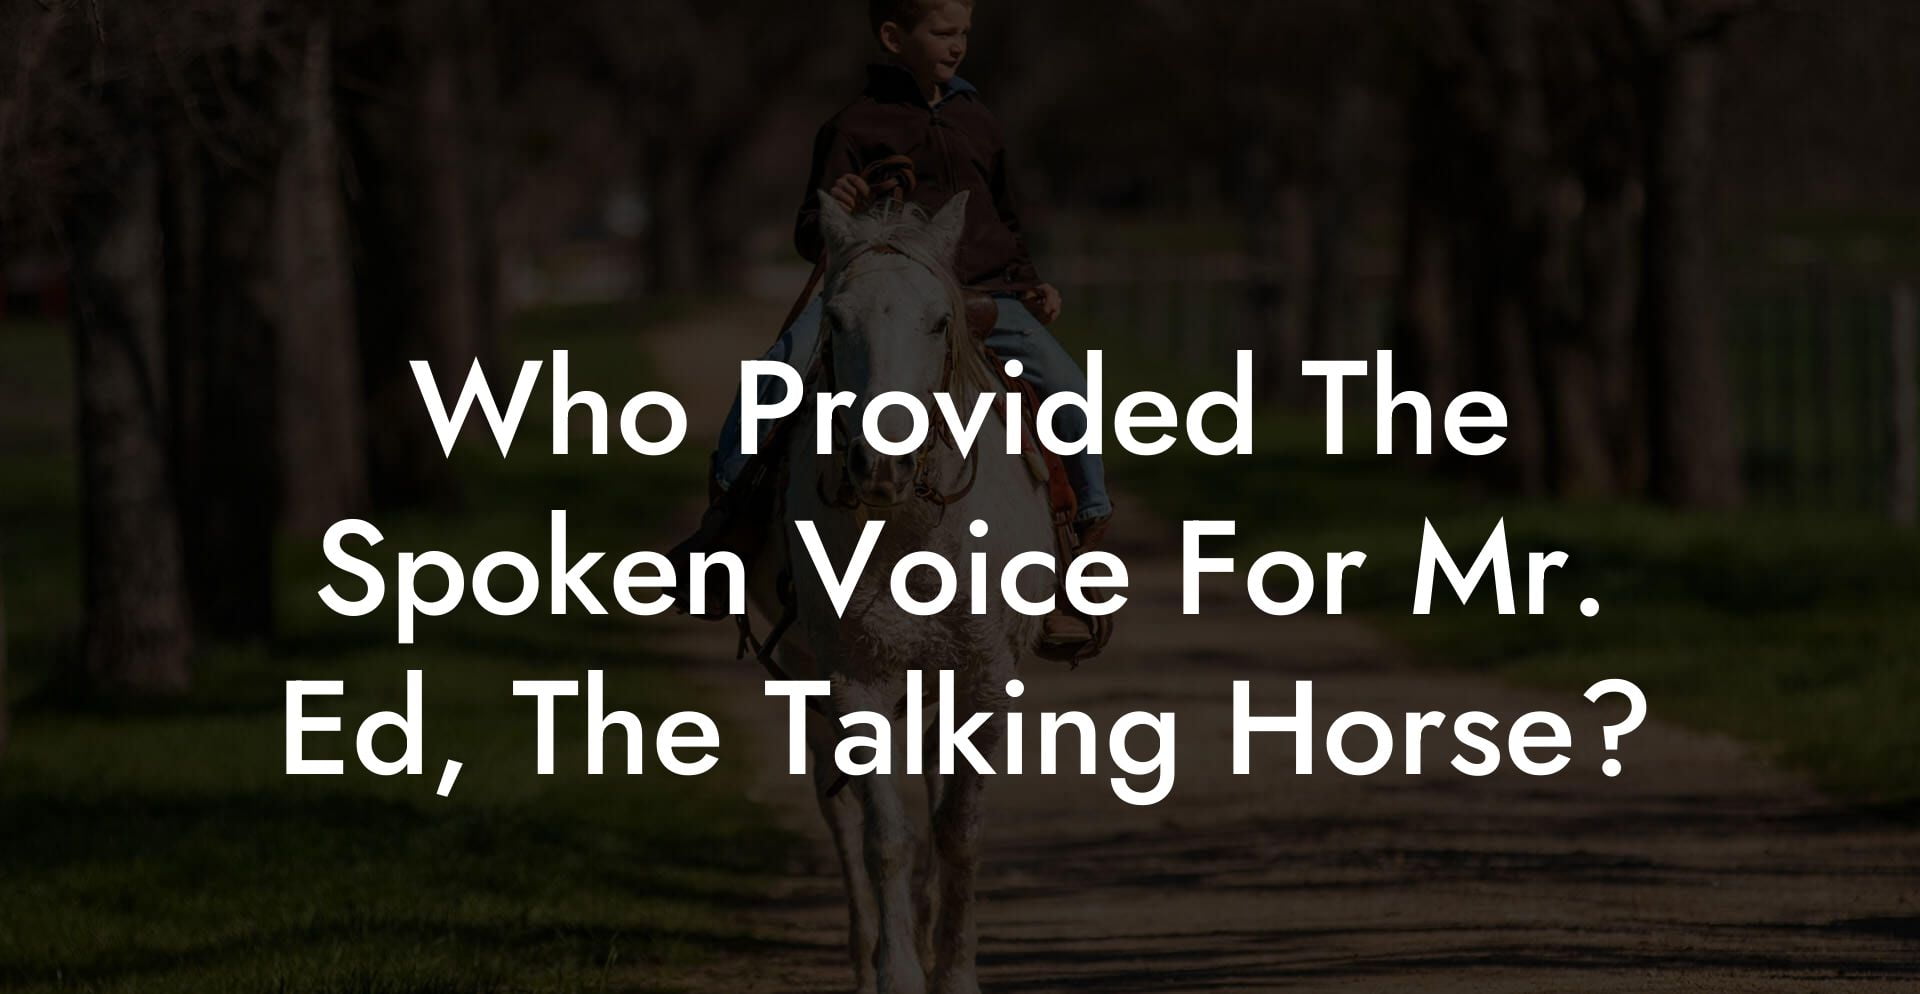 Who Provided The Spoken Voice For Mr. Ed, The Talking Horse?